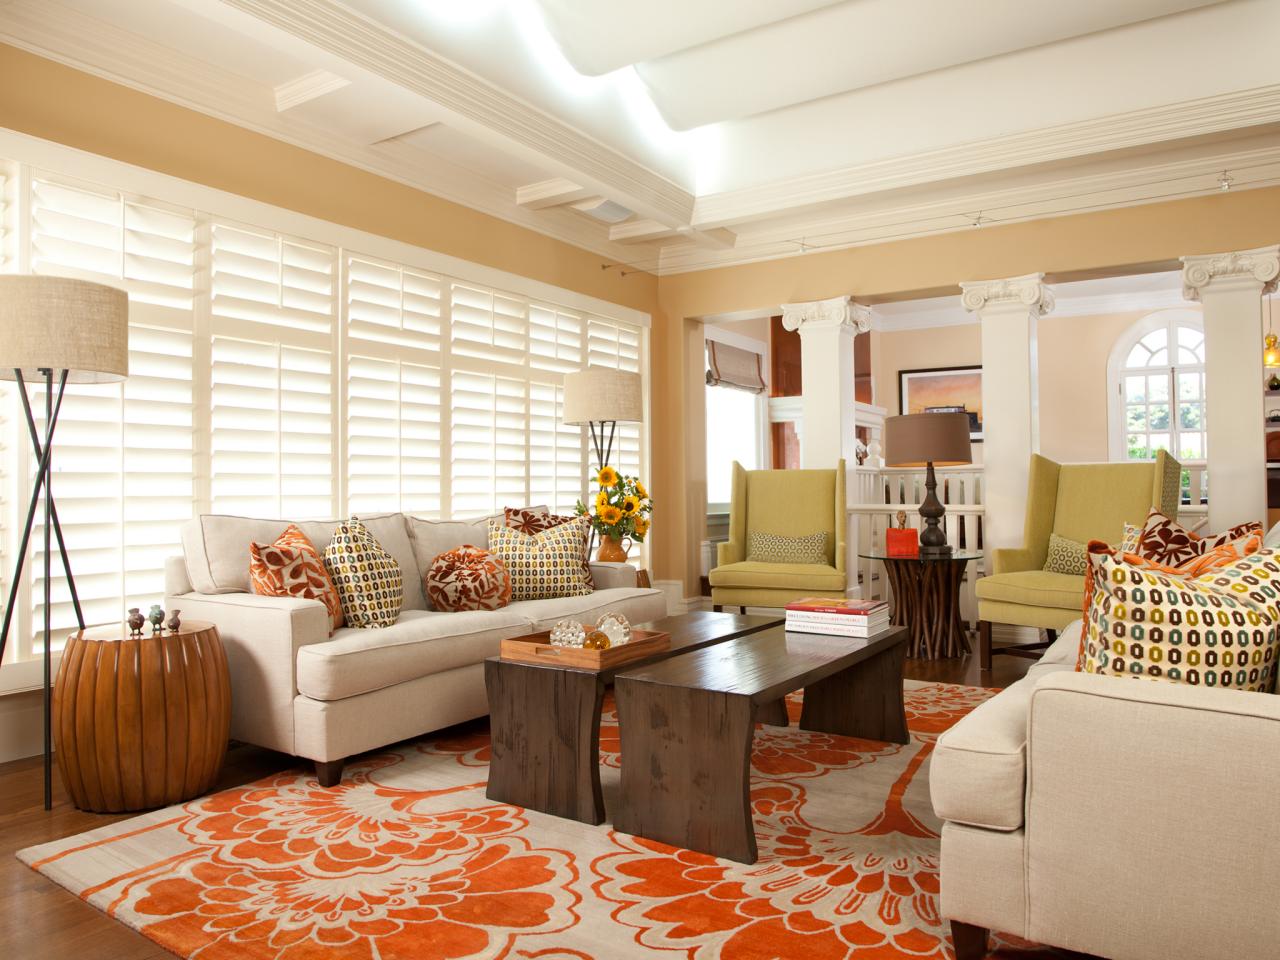 All About the Different Types of Plantation Shutters | DIY